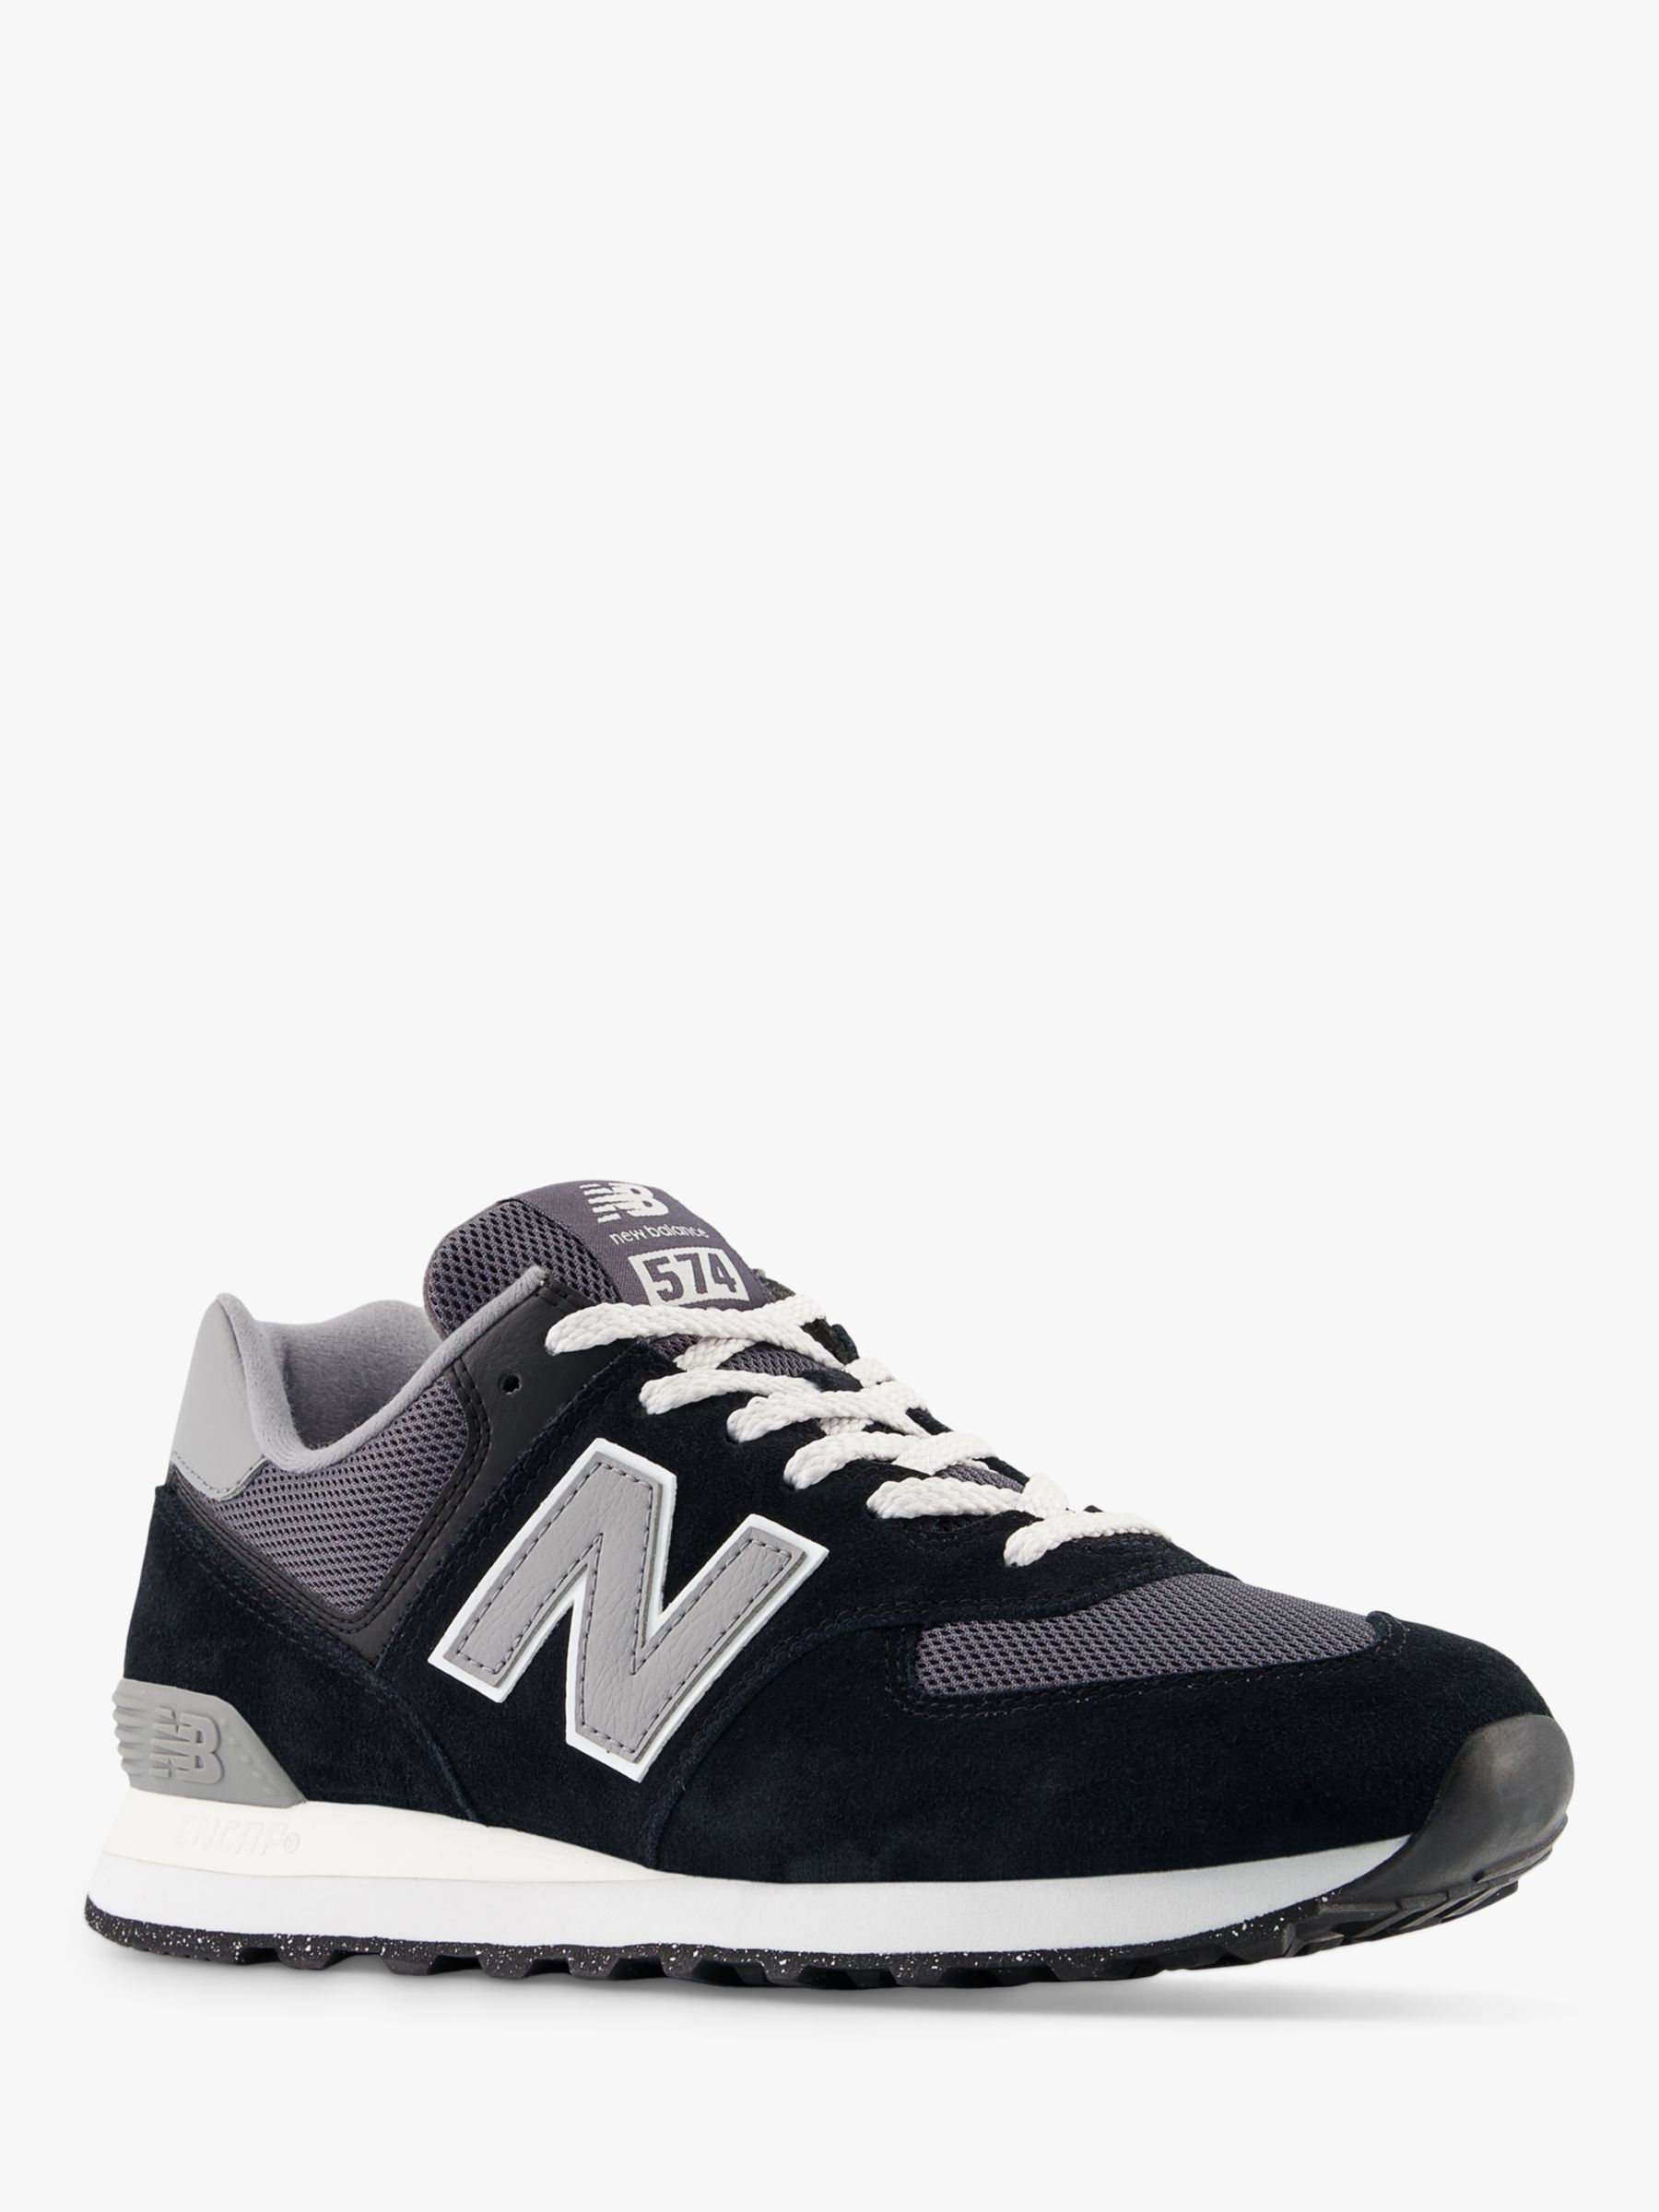 New Balance 574 Suede Trainers, Black Grey at John Lewis & Partners